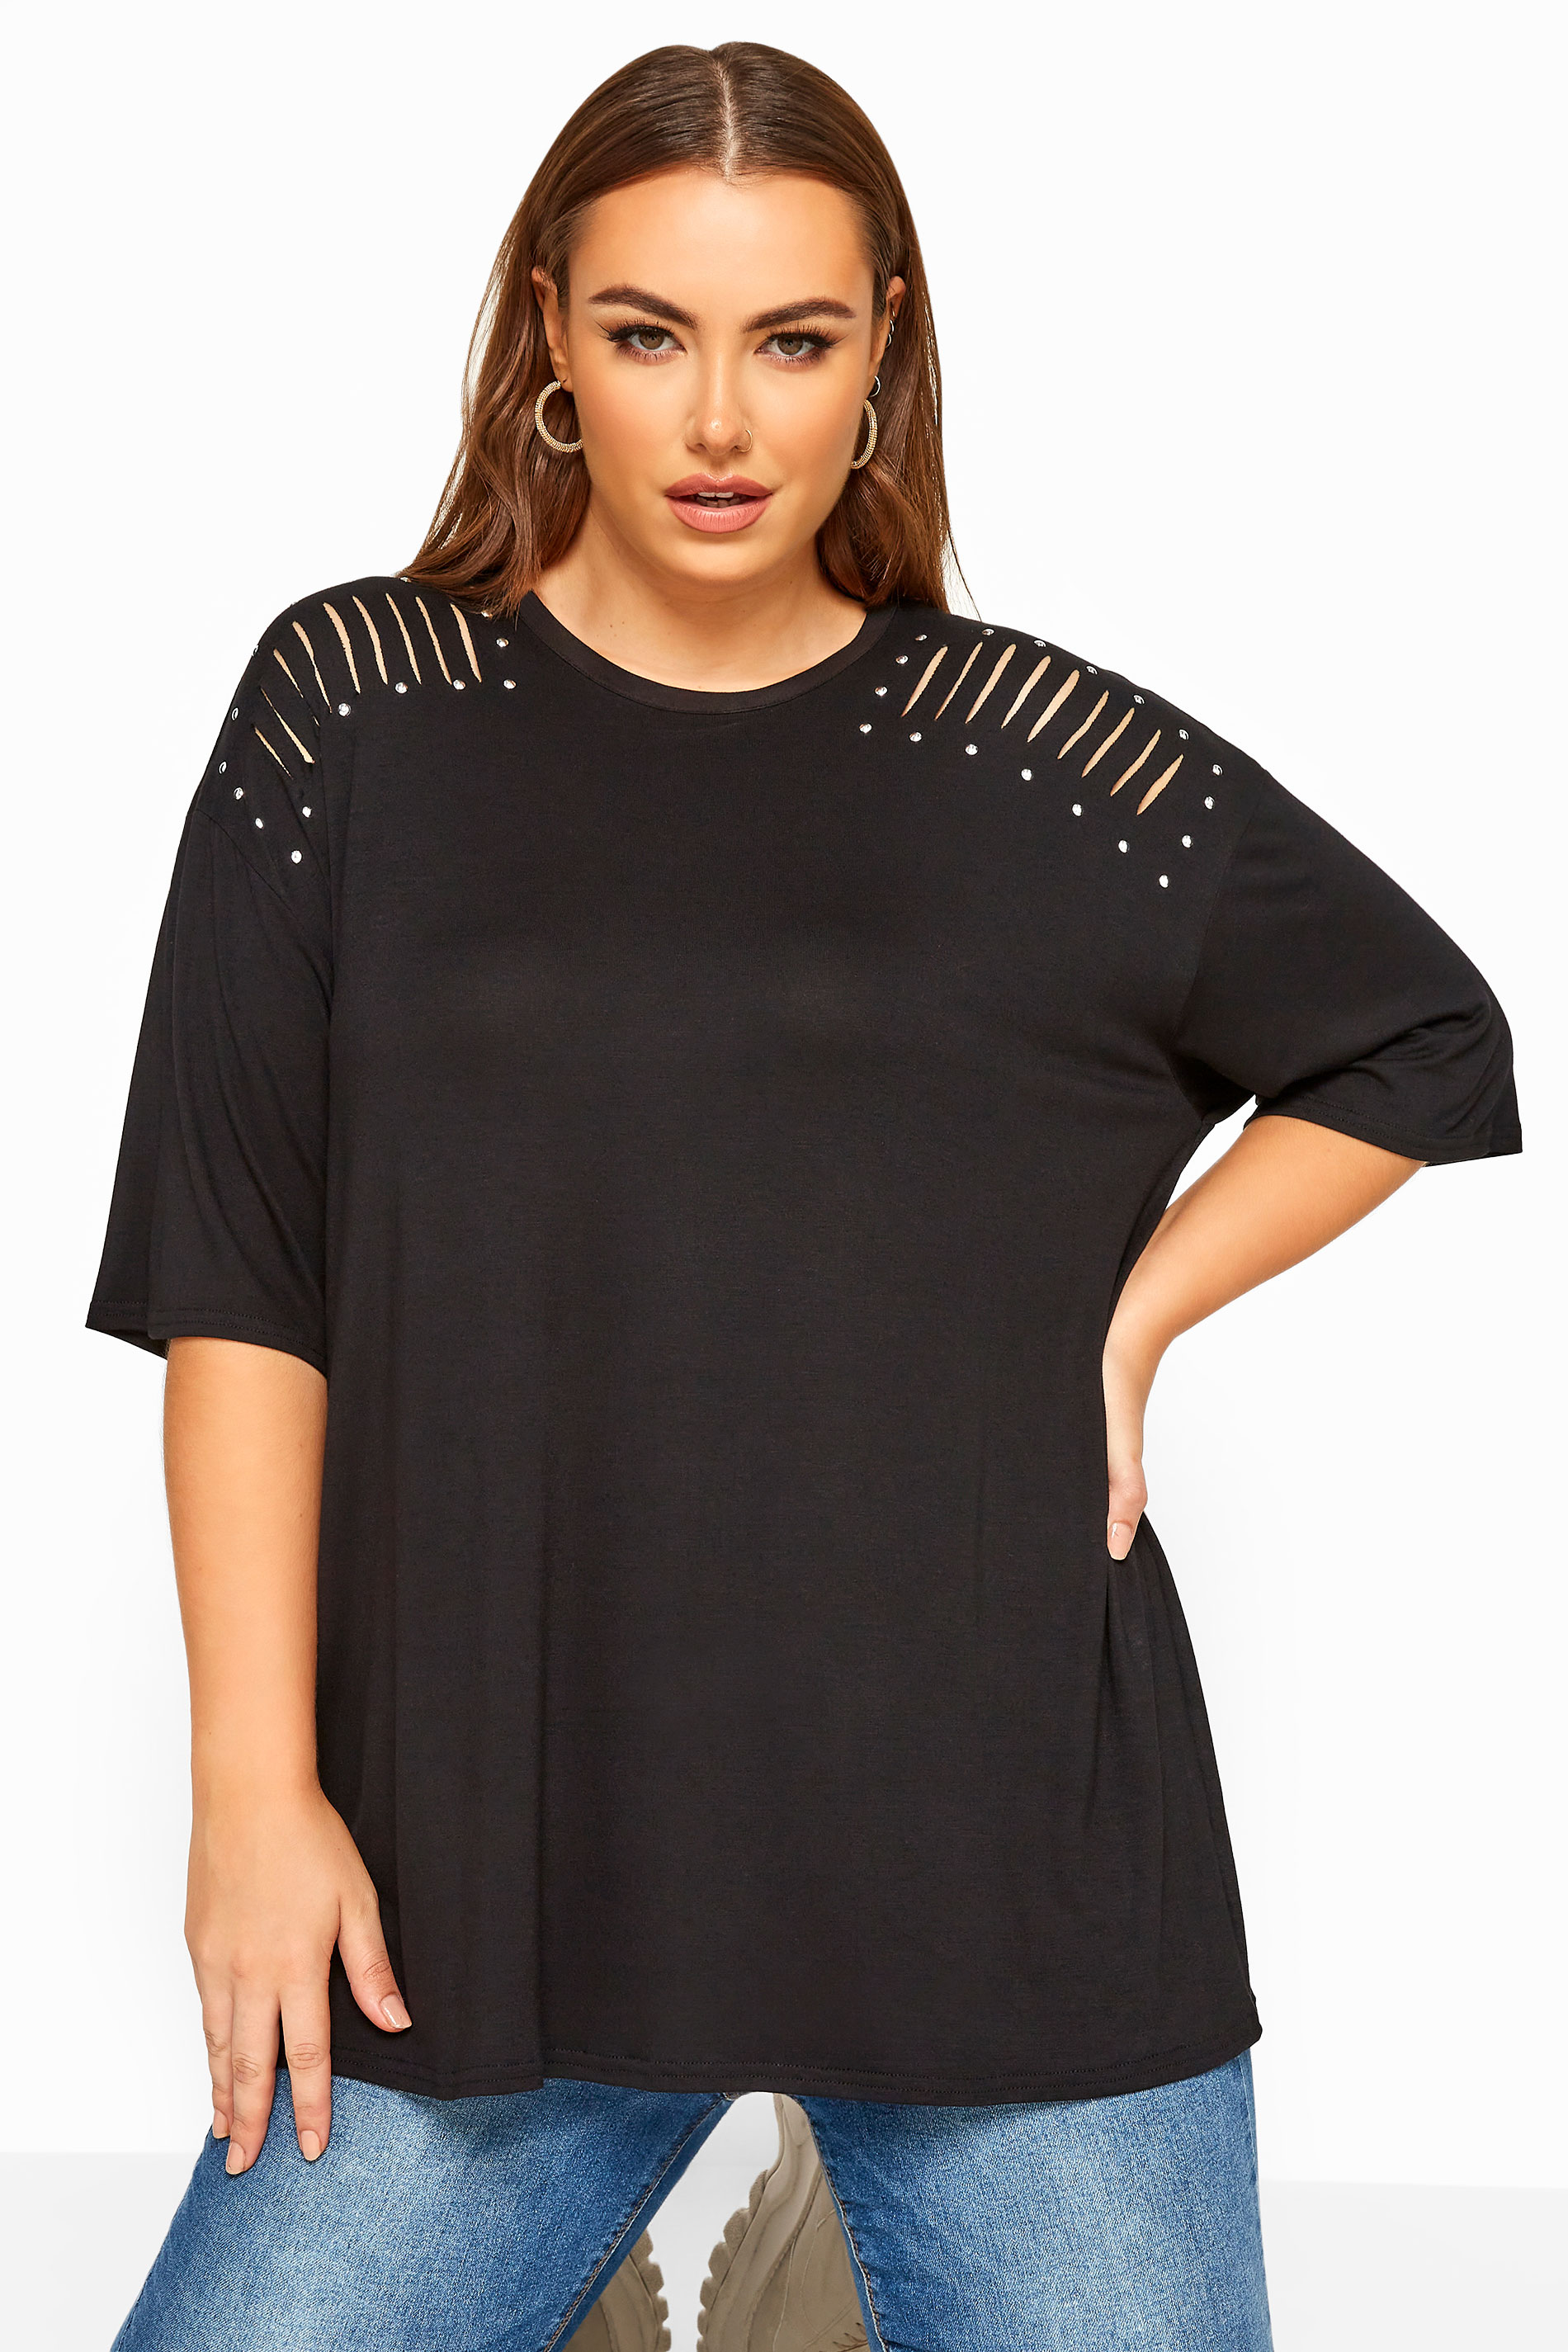 LIMITED COLLECTION Black Stud Laser Cut Top | Yours Clothing